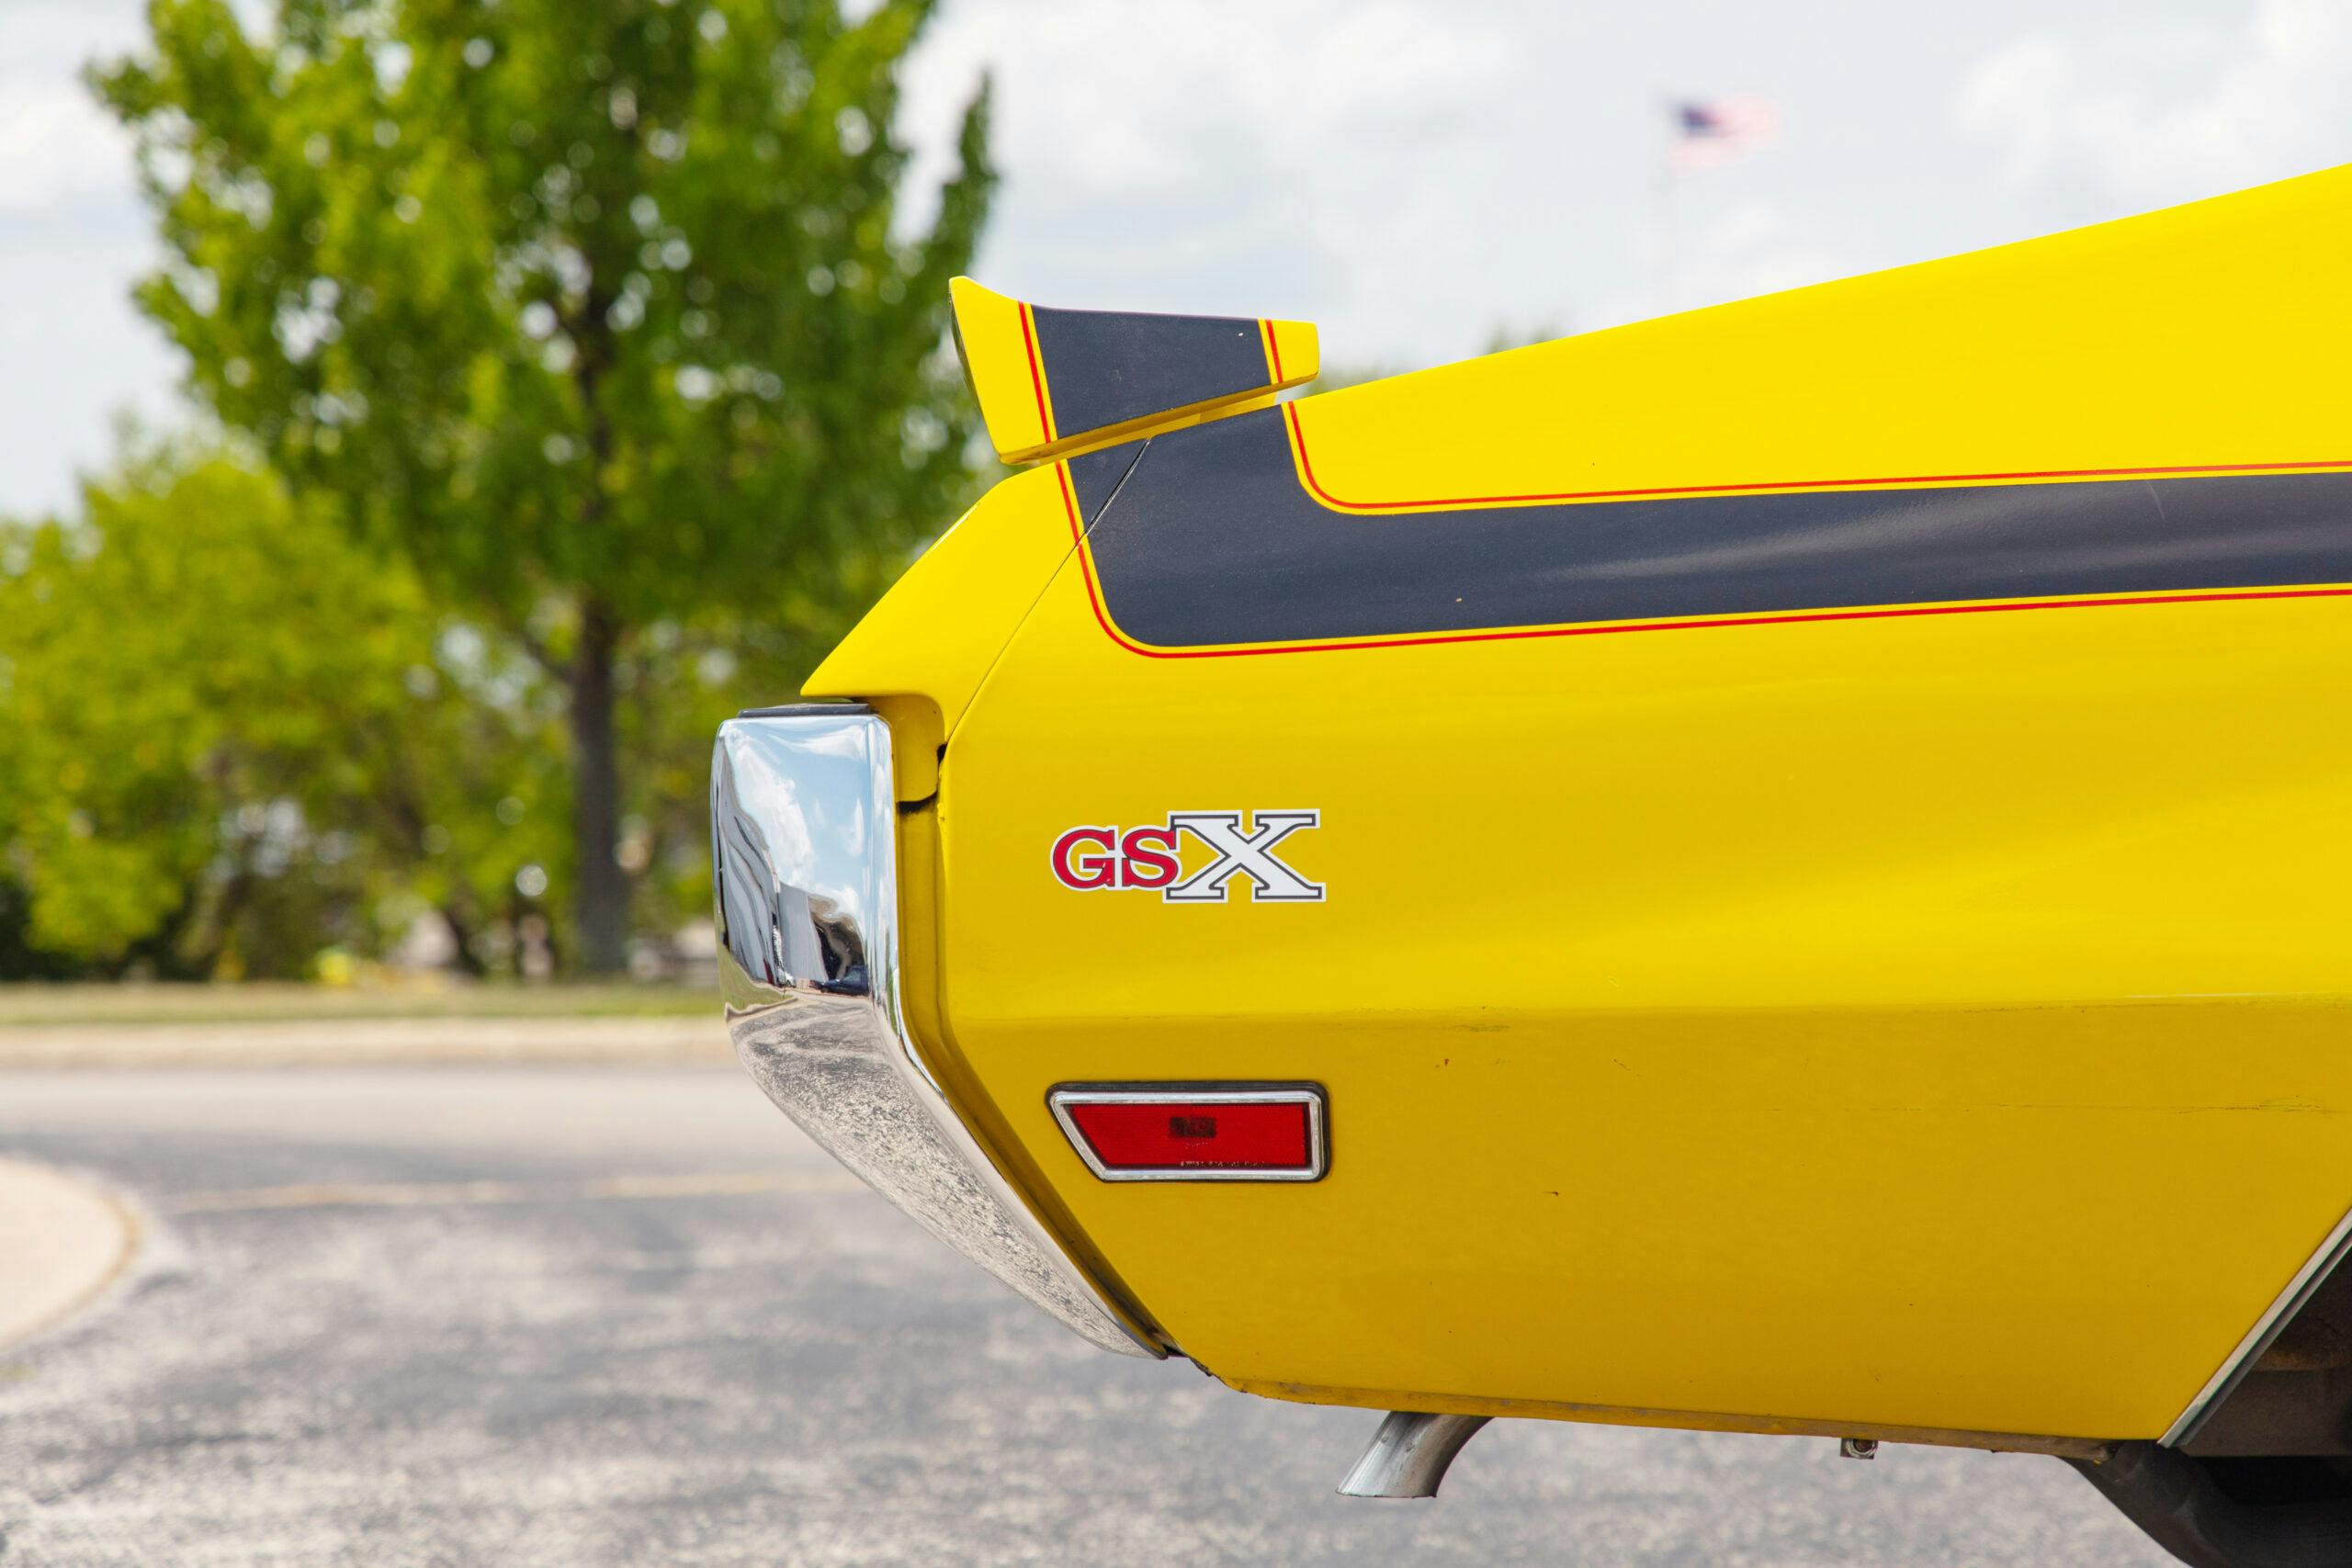 Buick GSX yellow high impact color rear end side profile